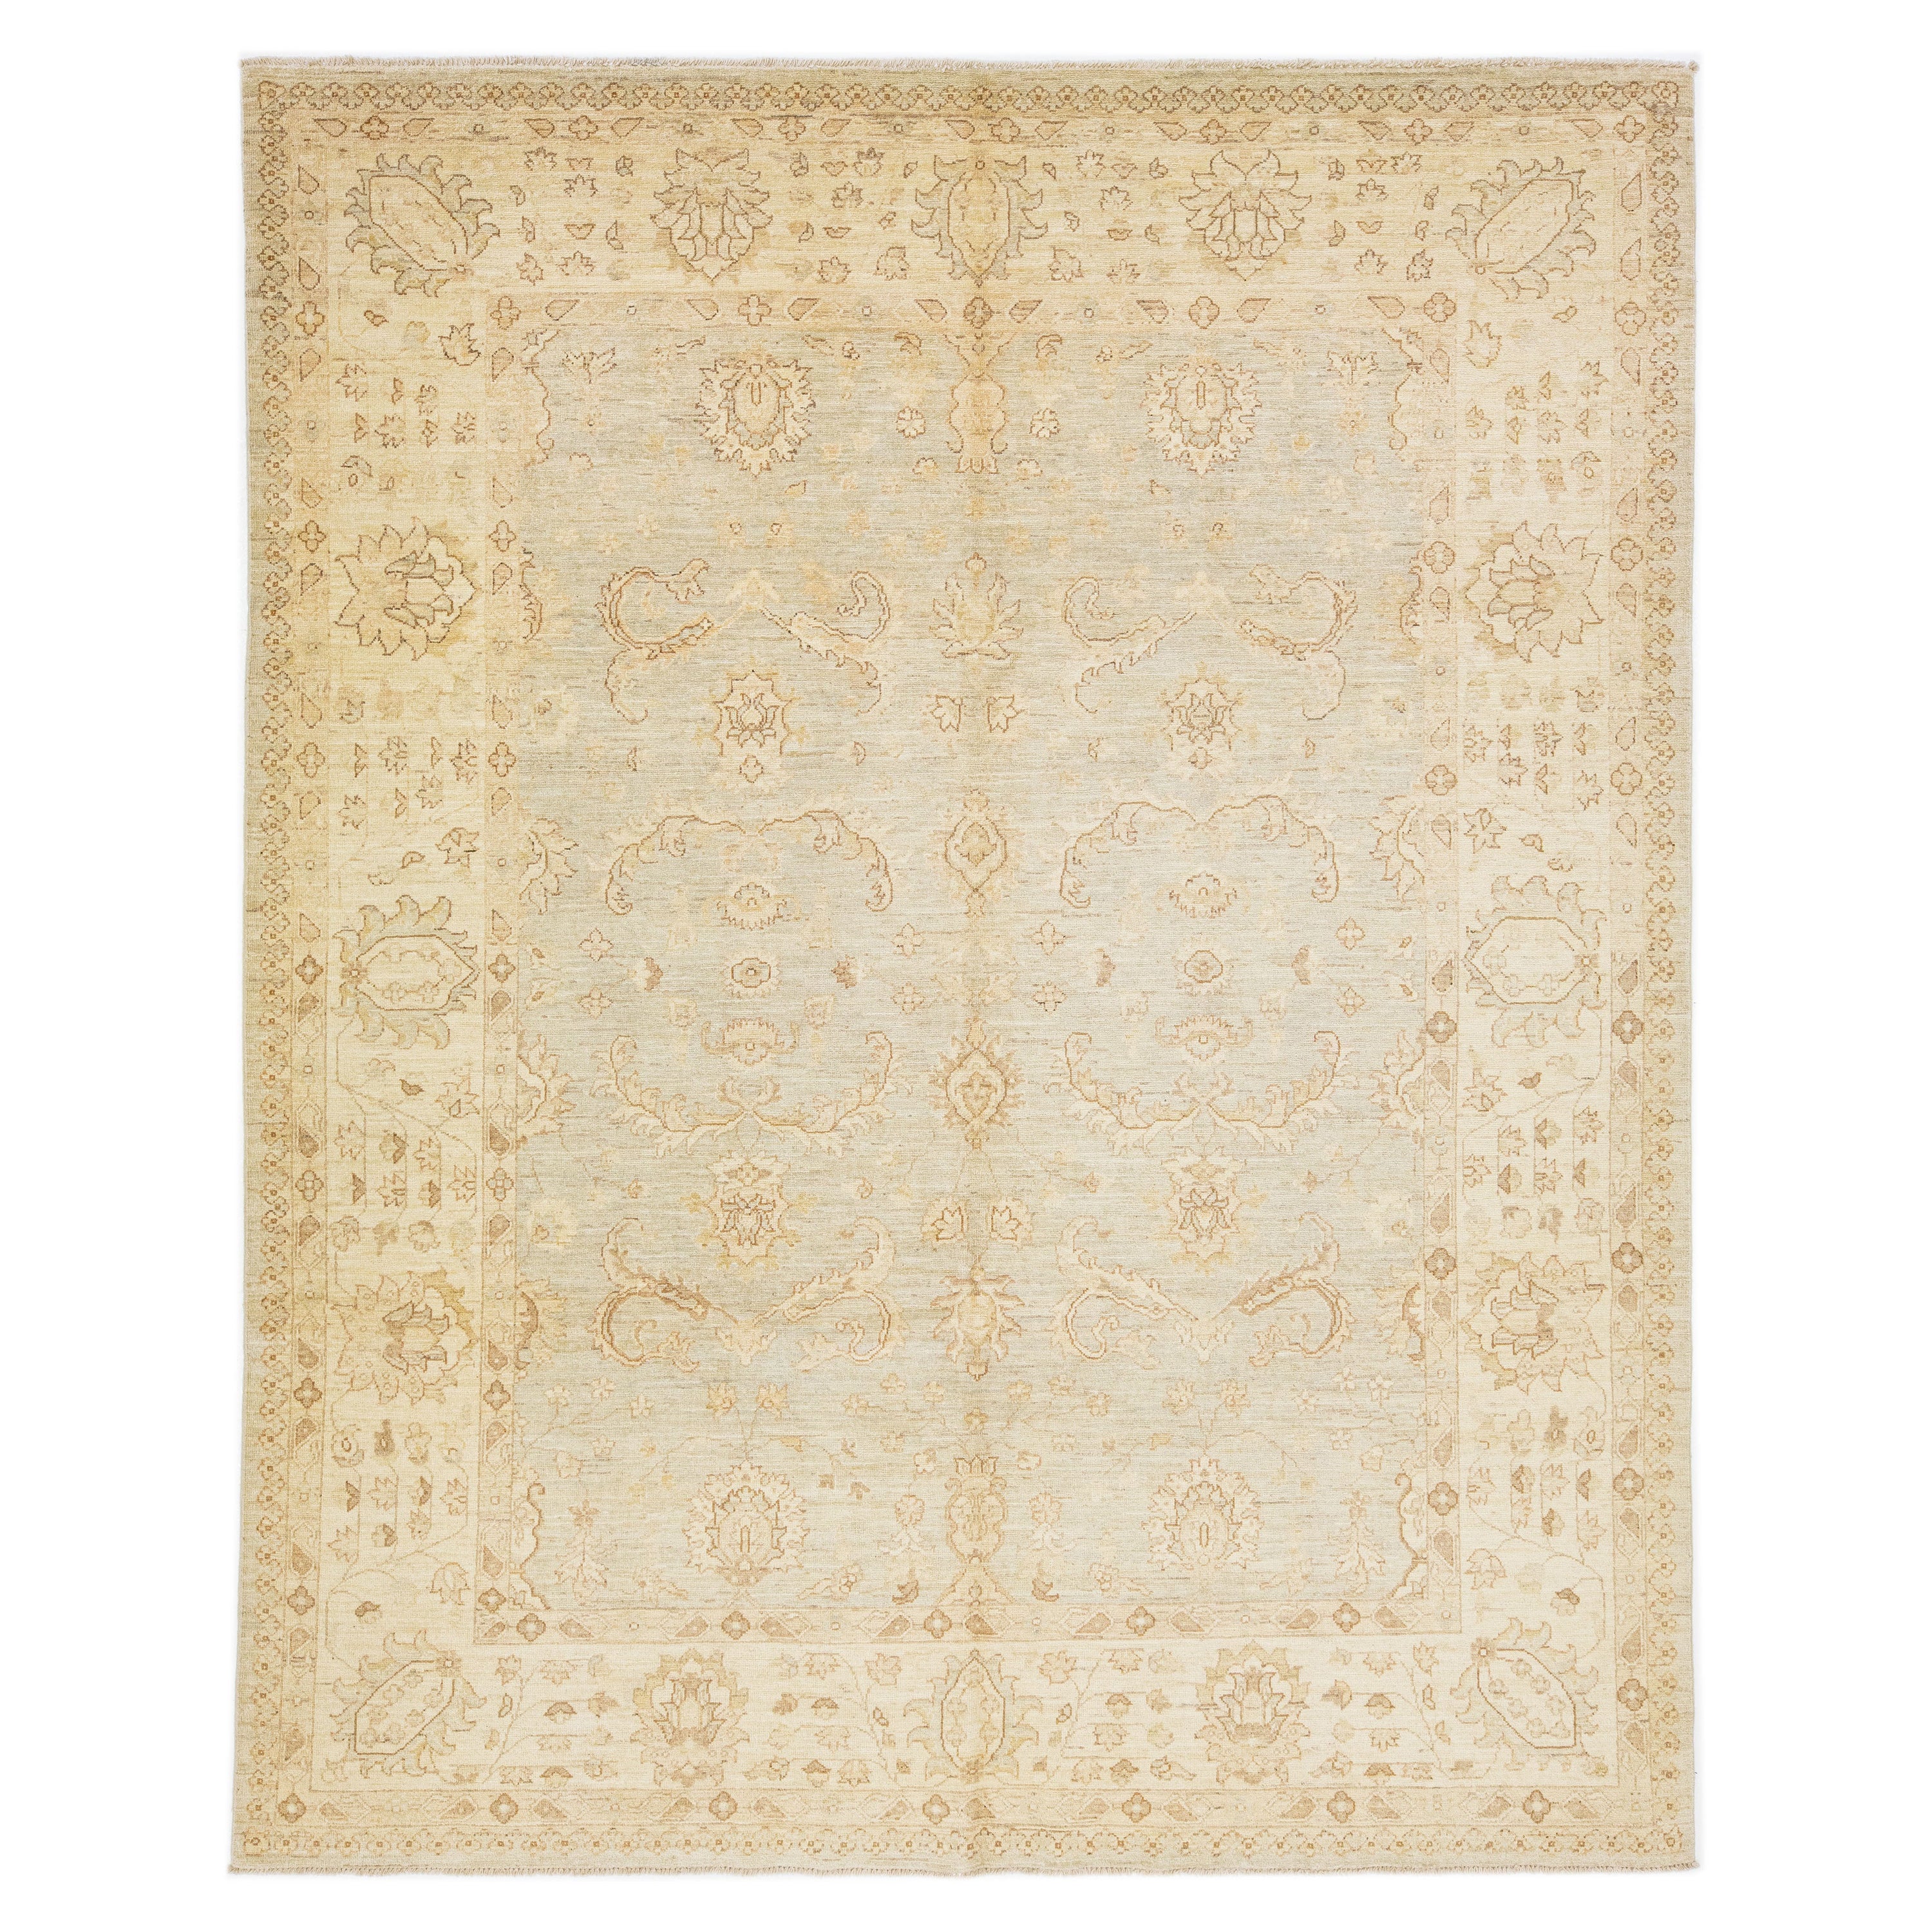 Modern Paki Peshawar Wool Rug in Beige and Gray with Allover Design